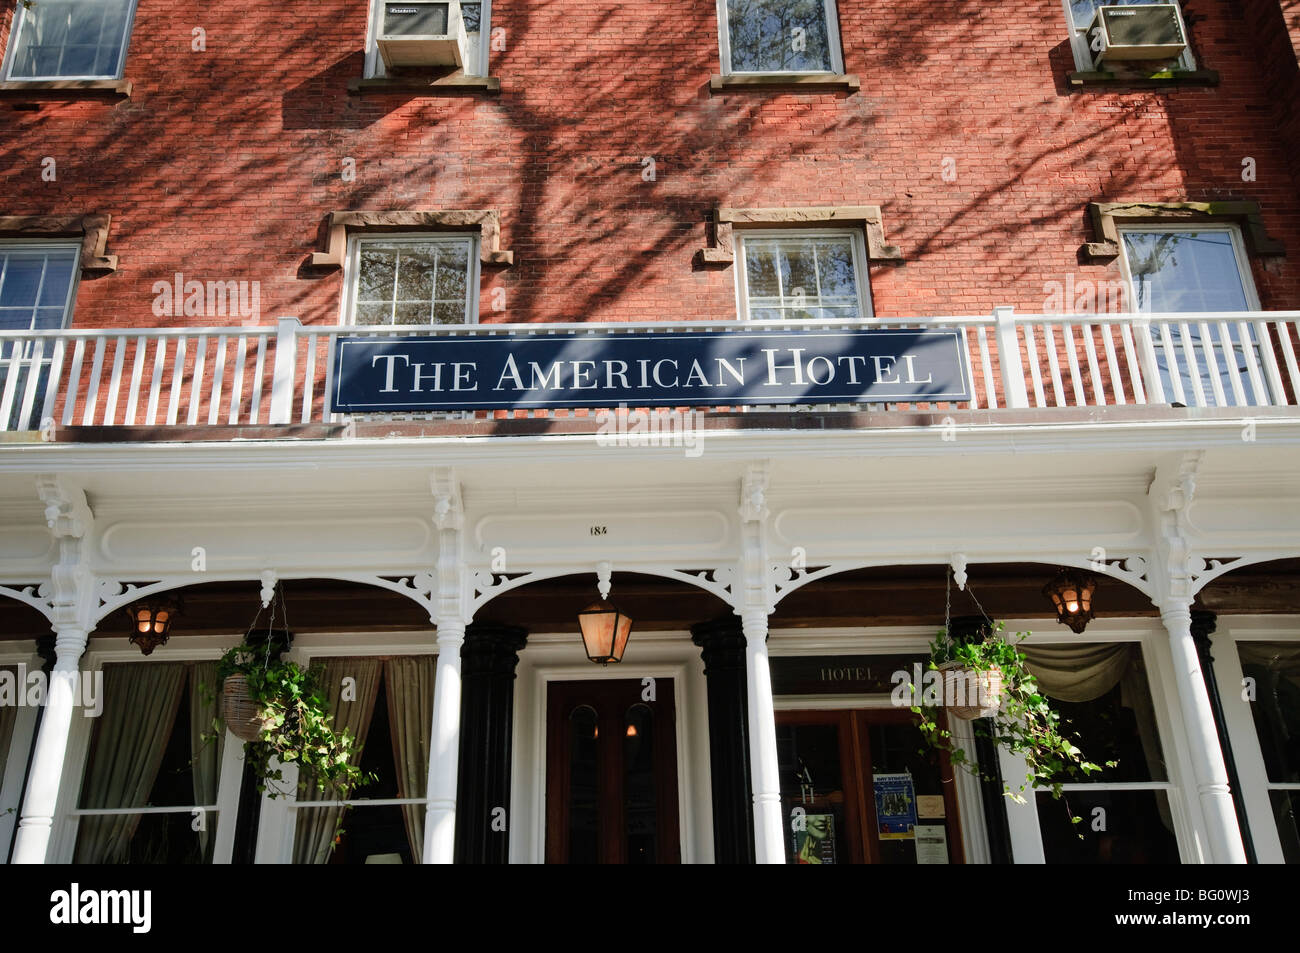 The famous American Hotel, Sag Harbor, The Hamptons, Long Island, New York State, United States of America, North America Stock Photo